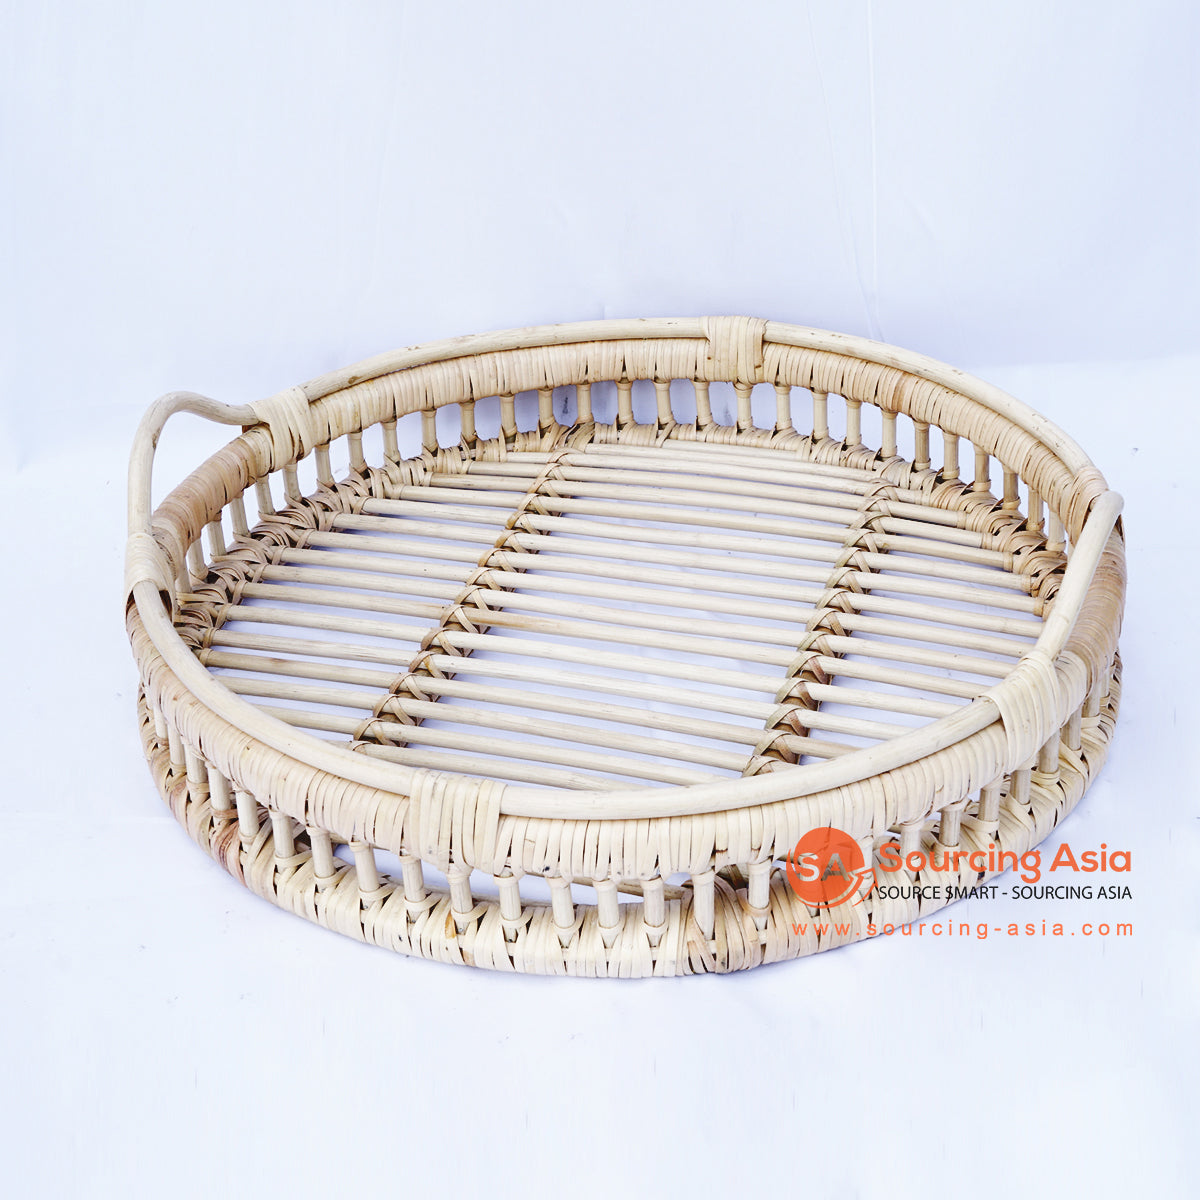 BNTC004-8 NATURAL RATTAN ROUND TRAY WITH HANDLE